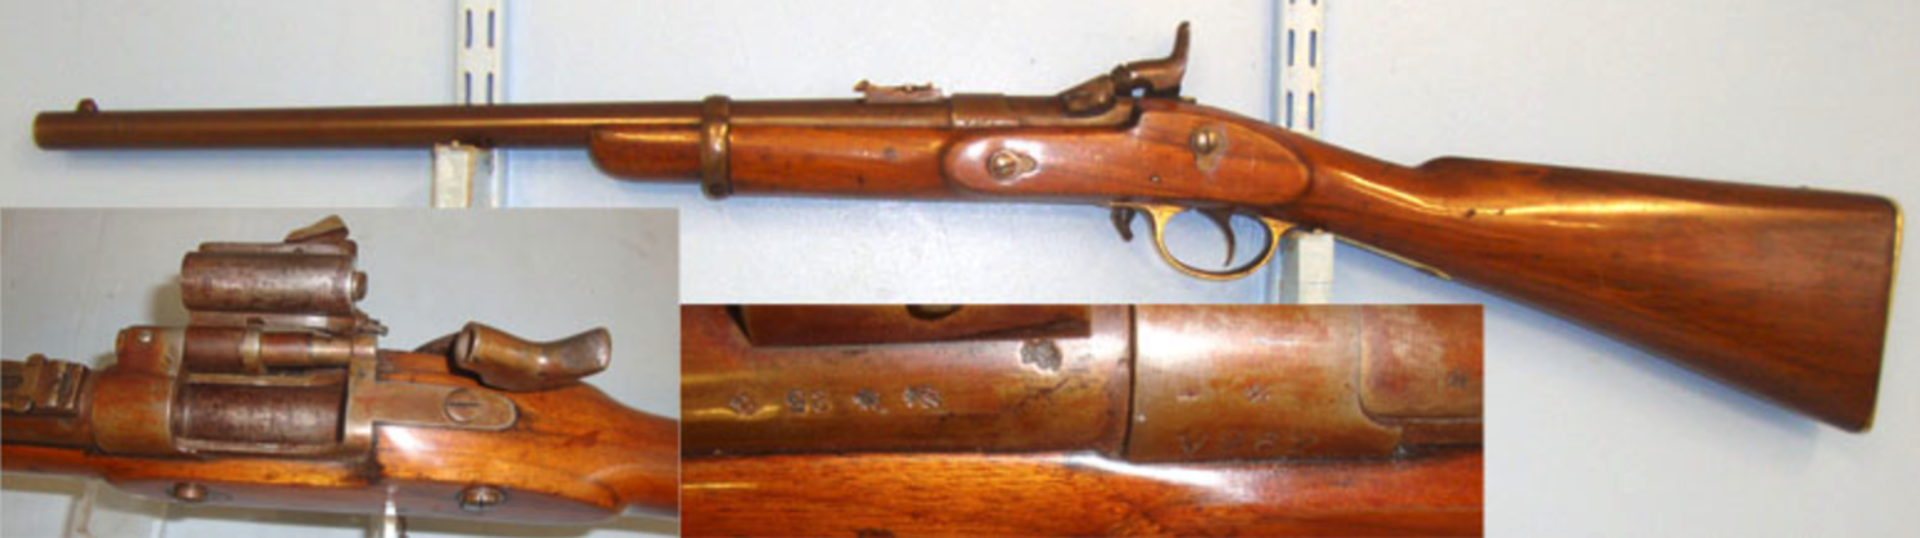 OFFICER’S QUALITY, 1874 Enfield Tower Snider .577 Calibre Cavalry Carbine By V&R Blakemore